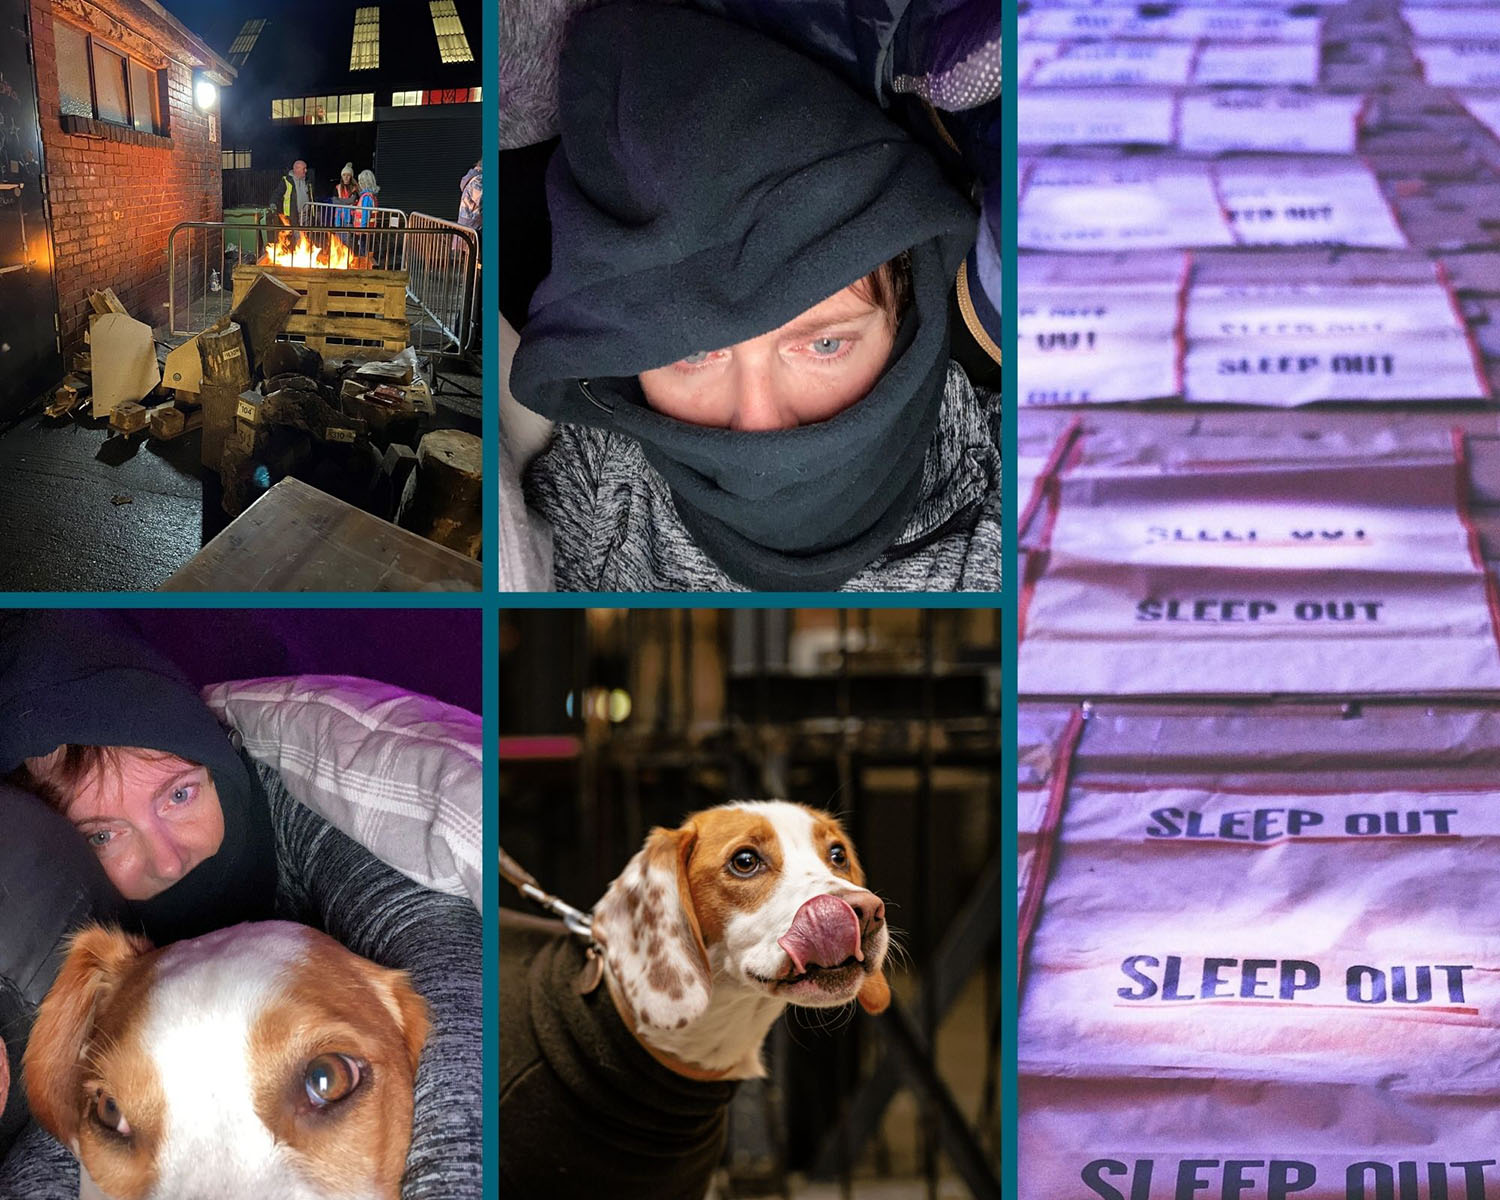 A collage of images of a woman and her dog sleeping outside